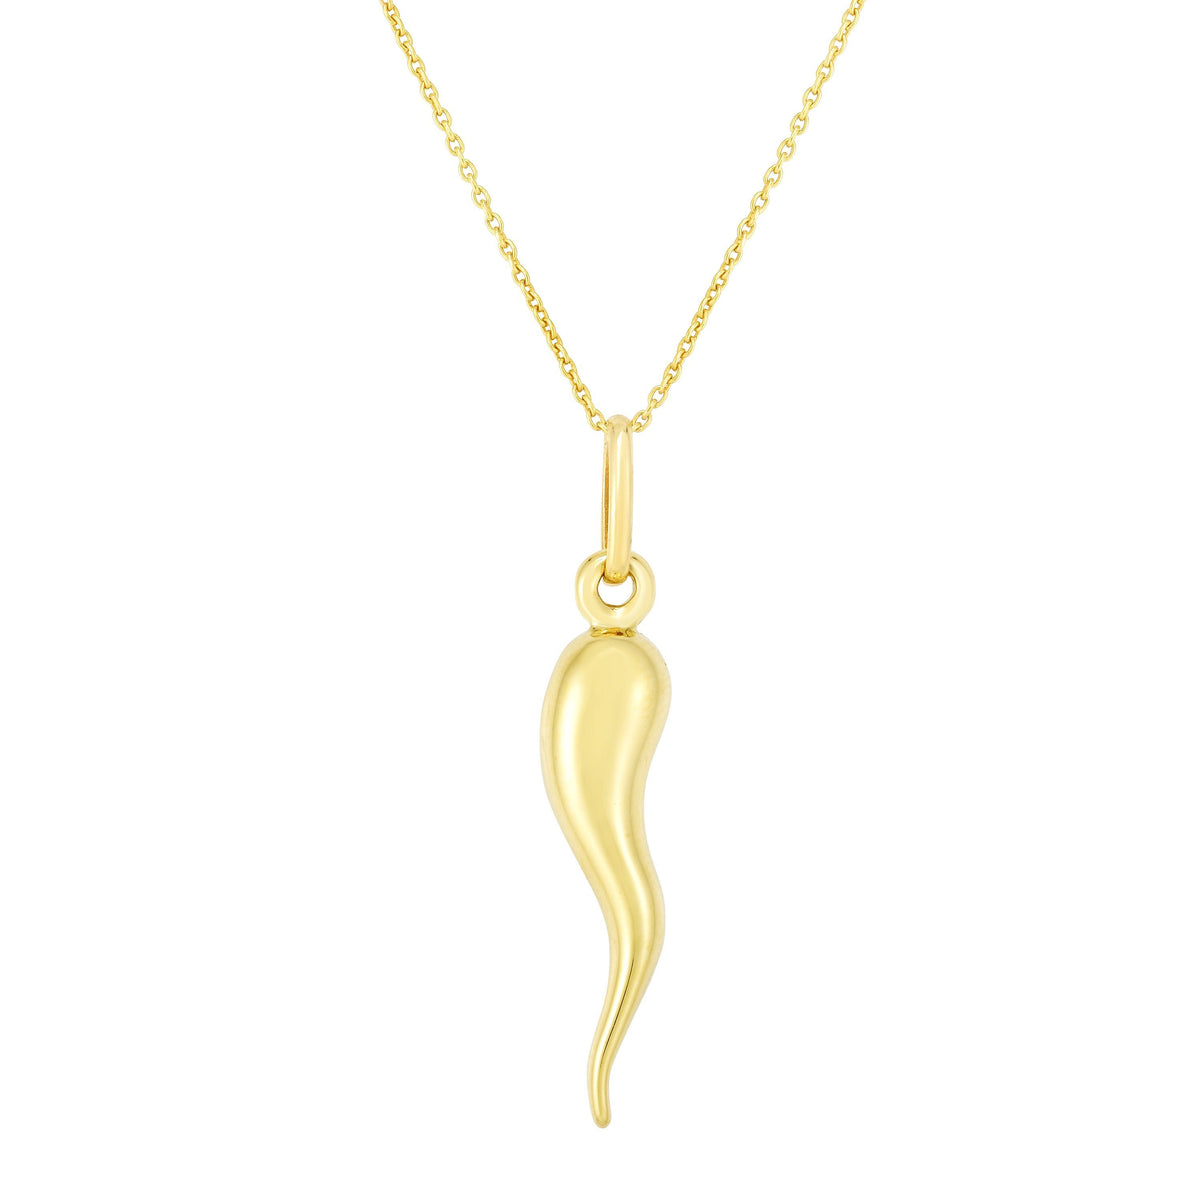 14k Yellow Gold Flame Pendant Necklace, 18" fine designer jewelry for men and women